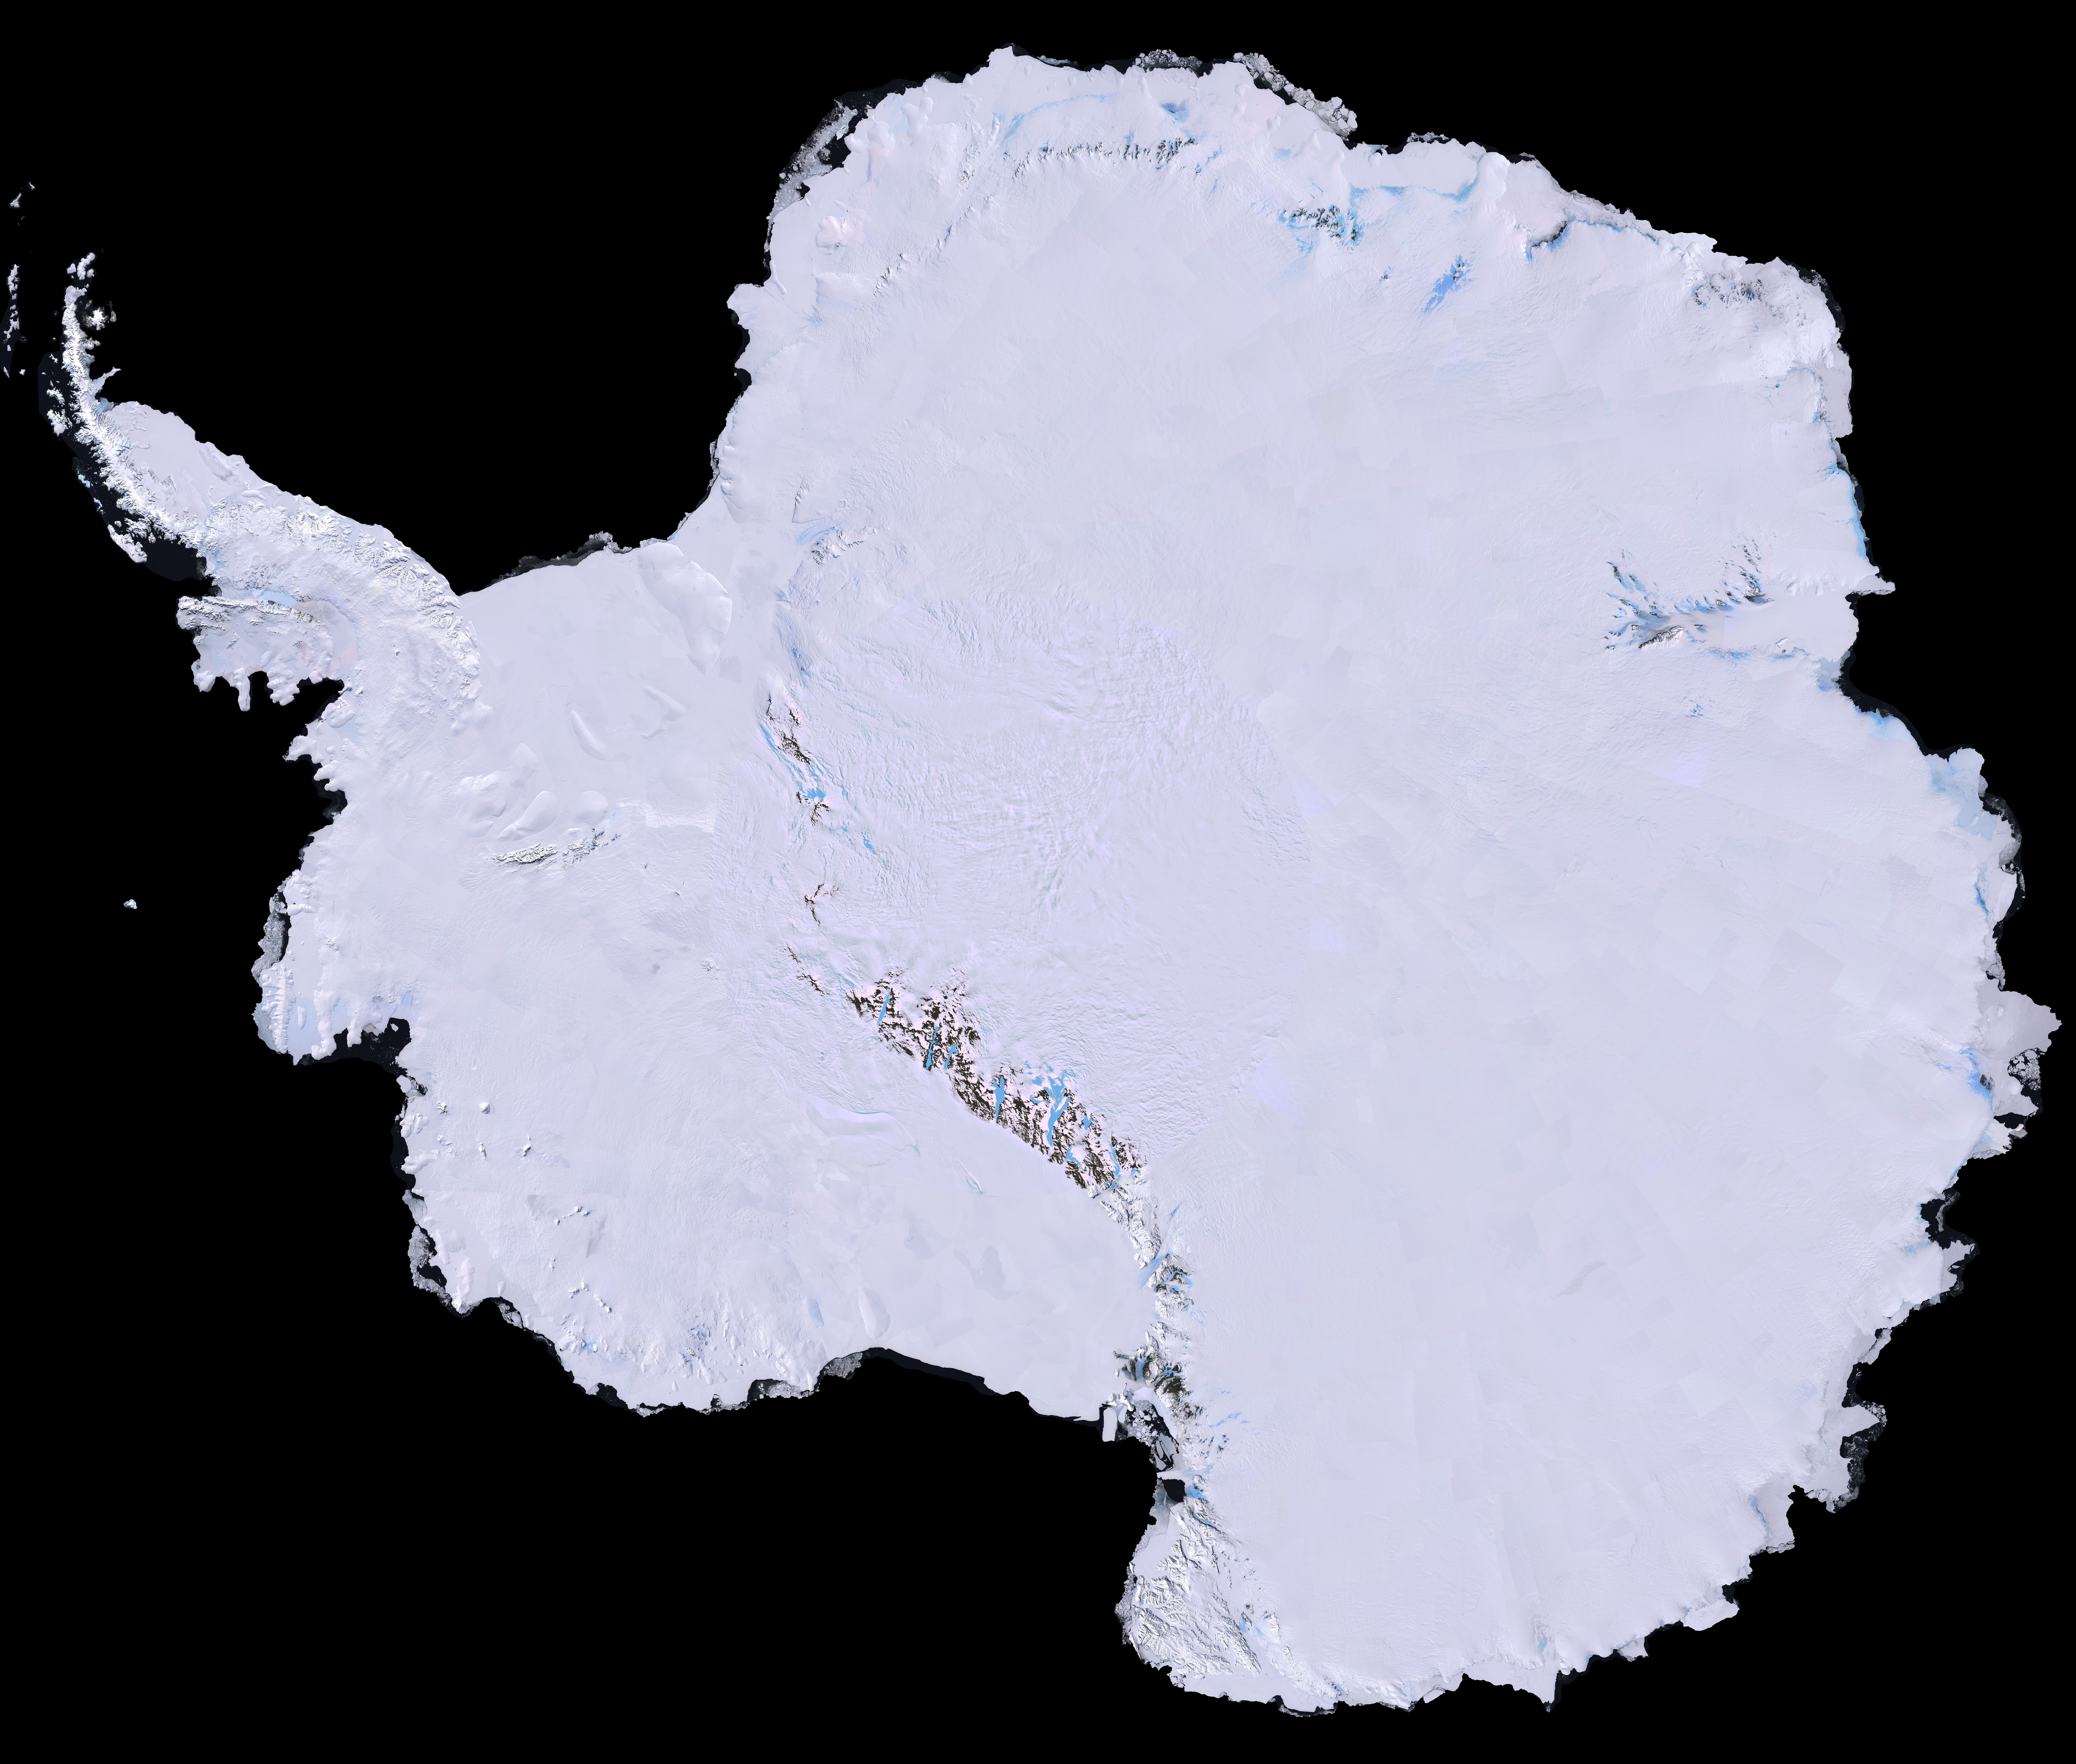 Larsen C Ice Shelf Crack Not Related To Climate Change ...Ice "More Stable Than Previously Thought"